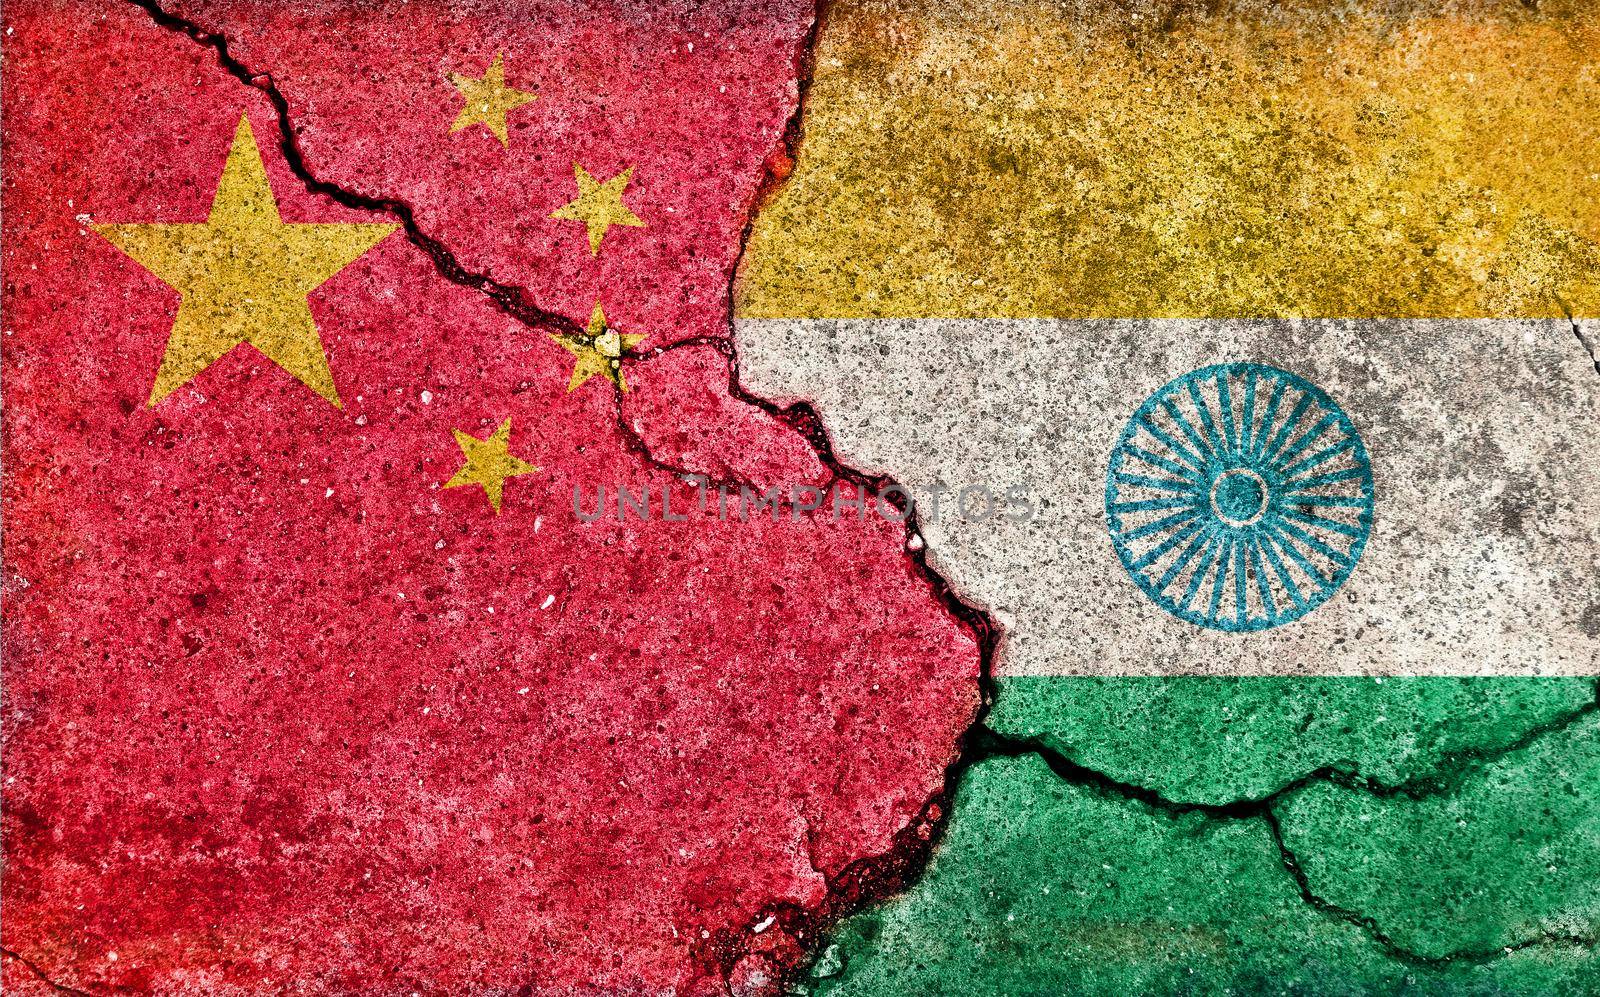 Grunge country flag illustration (cracked concrete background) / China vs India (Political or economic conflict)